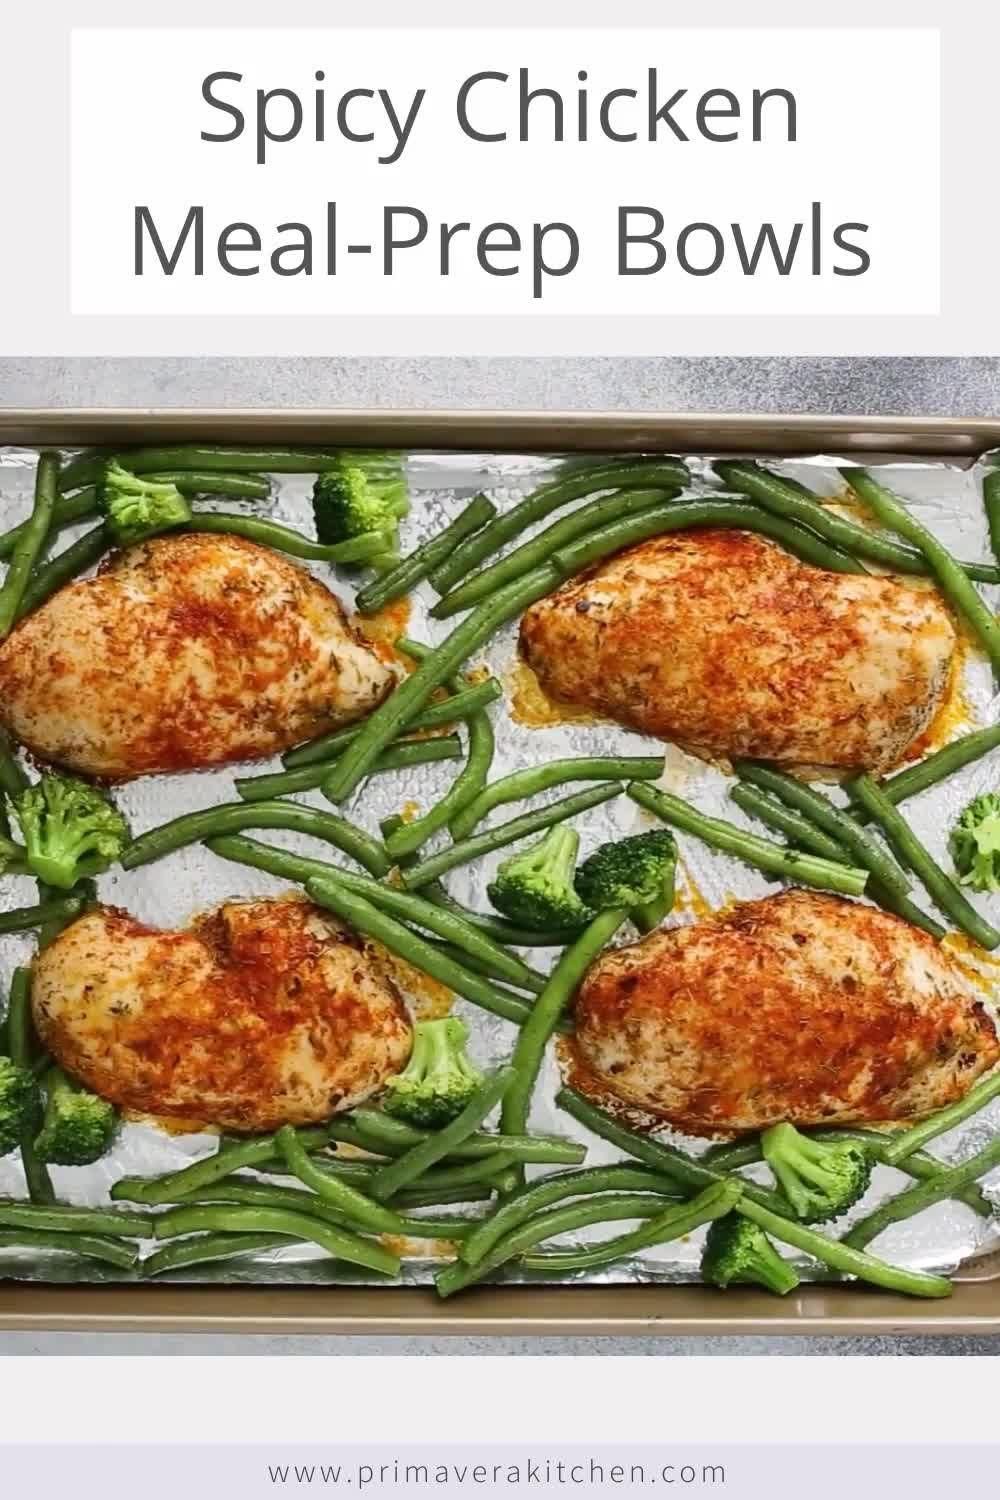 Spicy Chicken Meal-Prep Bowls -   18 meal prep recipes for the week lunches ideas